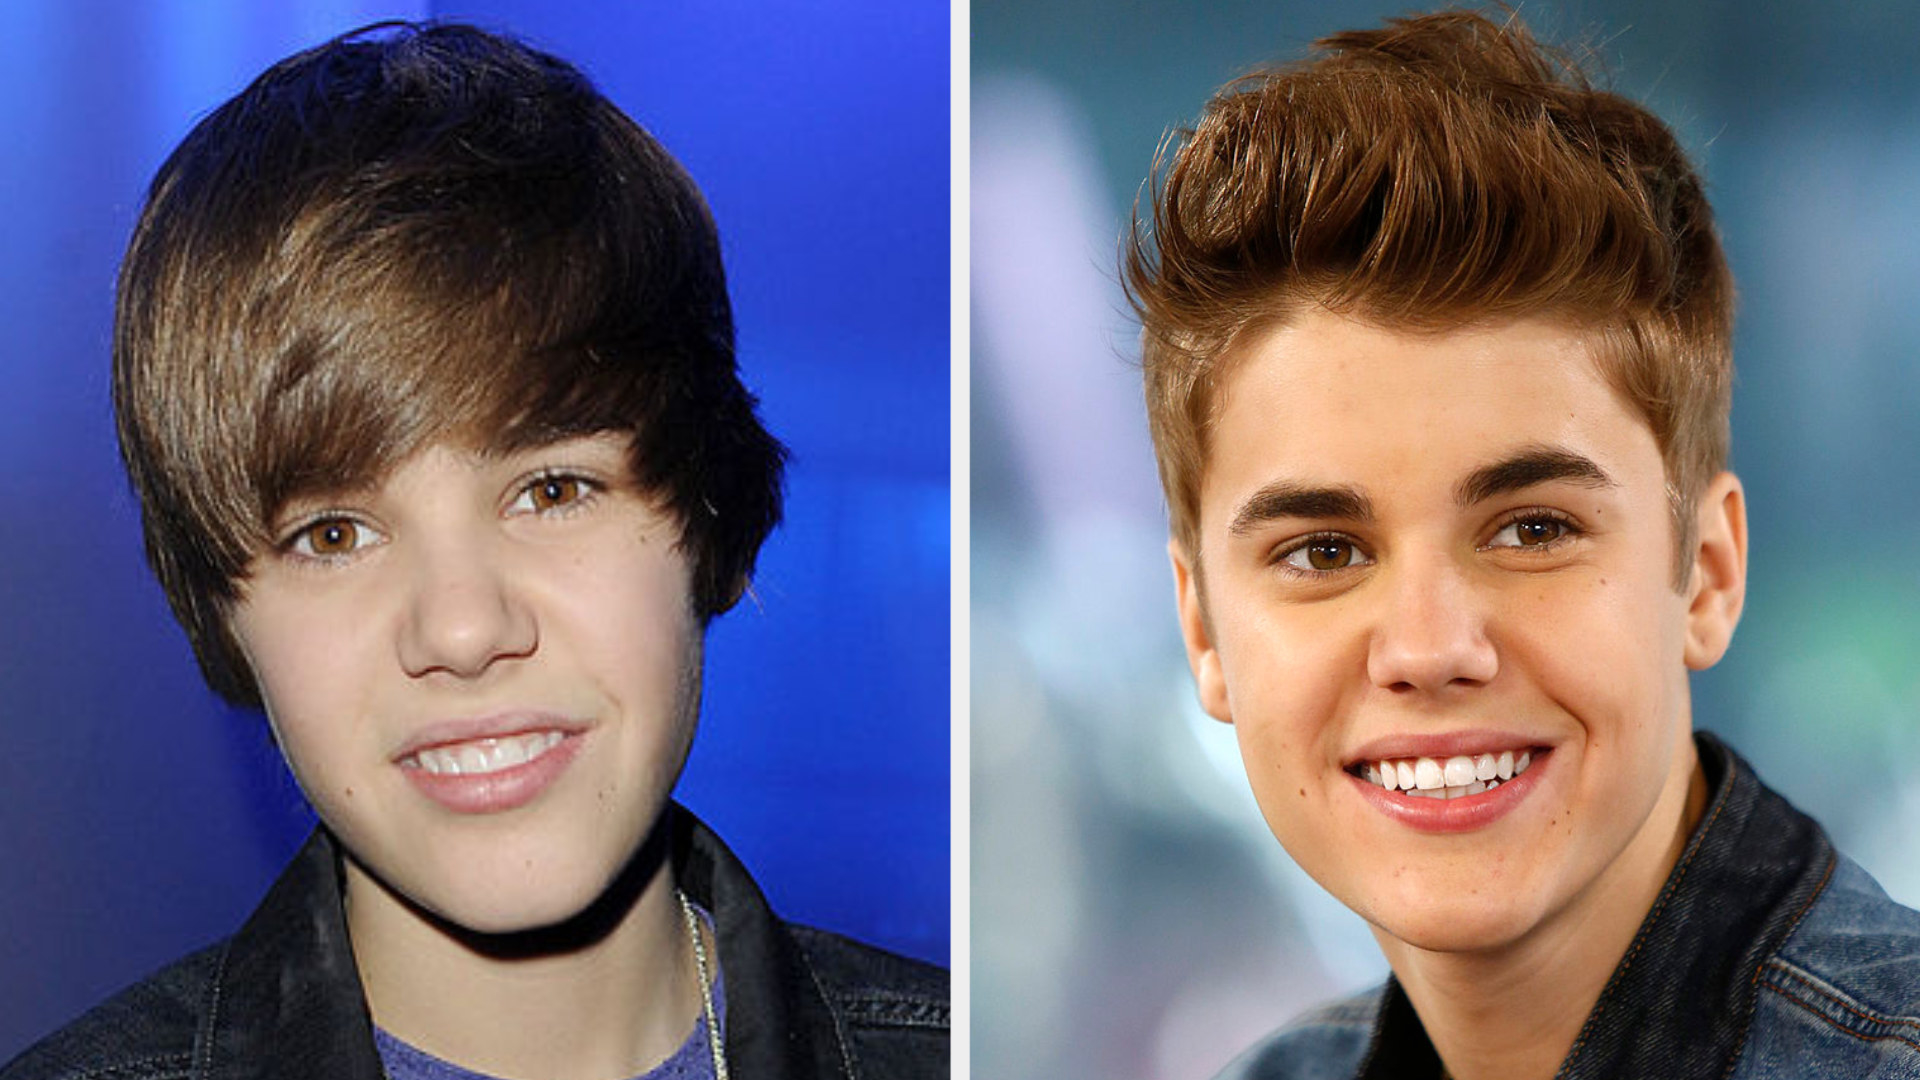 Justin Bieber with his iconic hair swoop and with a shorter look